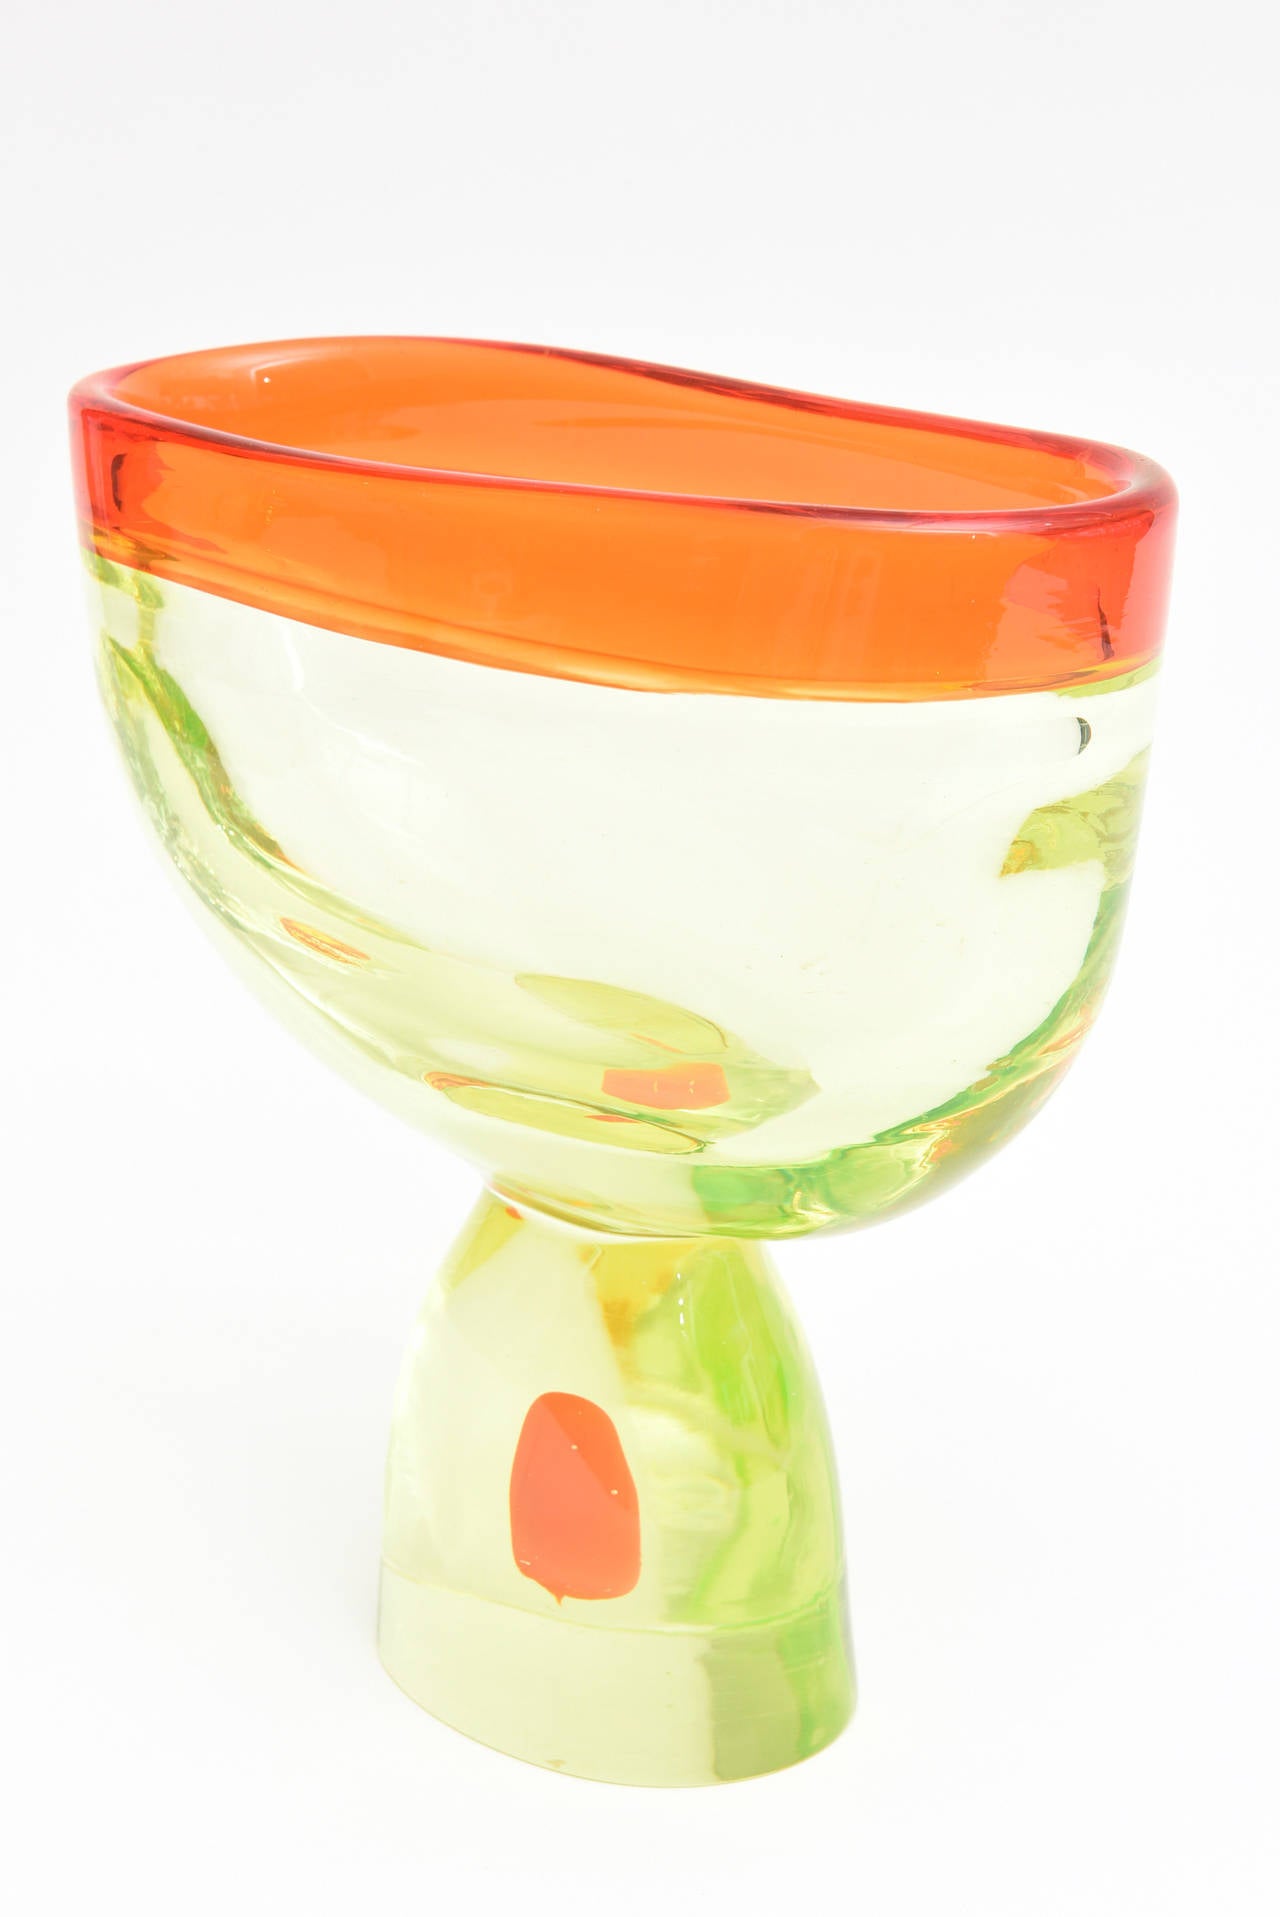 The luscious colors of chartreuse meets Hermes orange is this Italian Murano large and beautiful sommerso glass vase/vessel/object/sculpture by Antonio da Ros for Cenedese.
The top rim is Hermes orange and the orange blob on the bottom looks like it